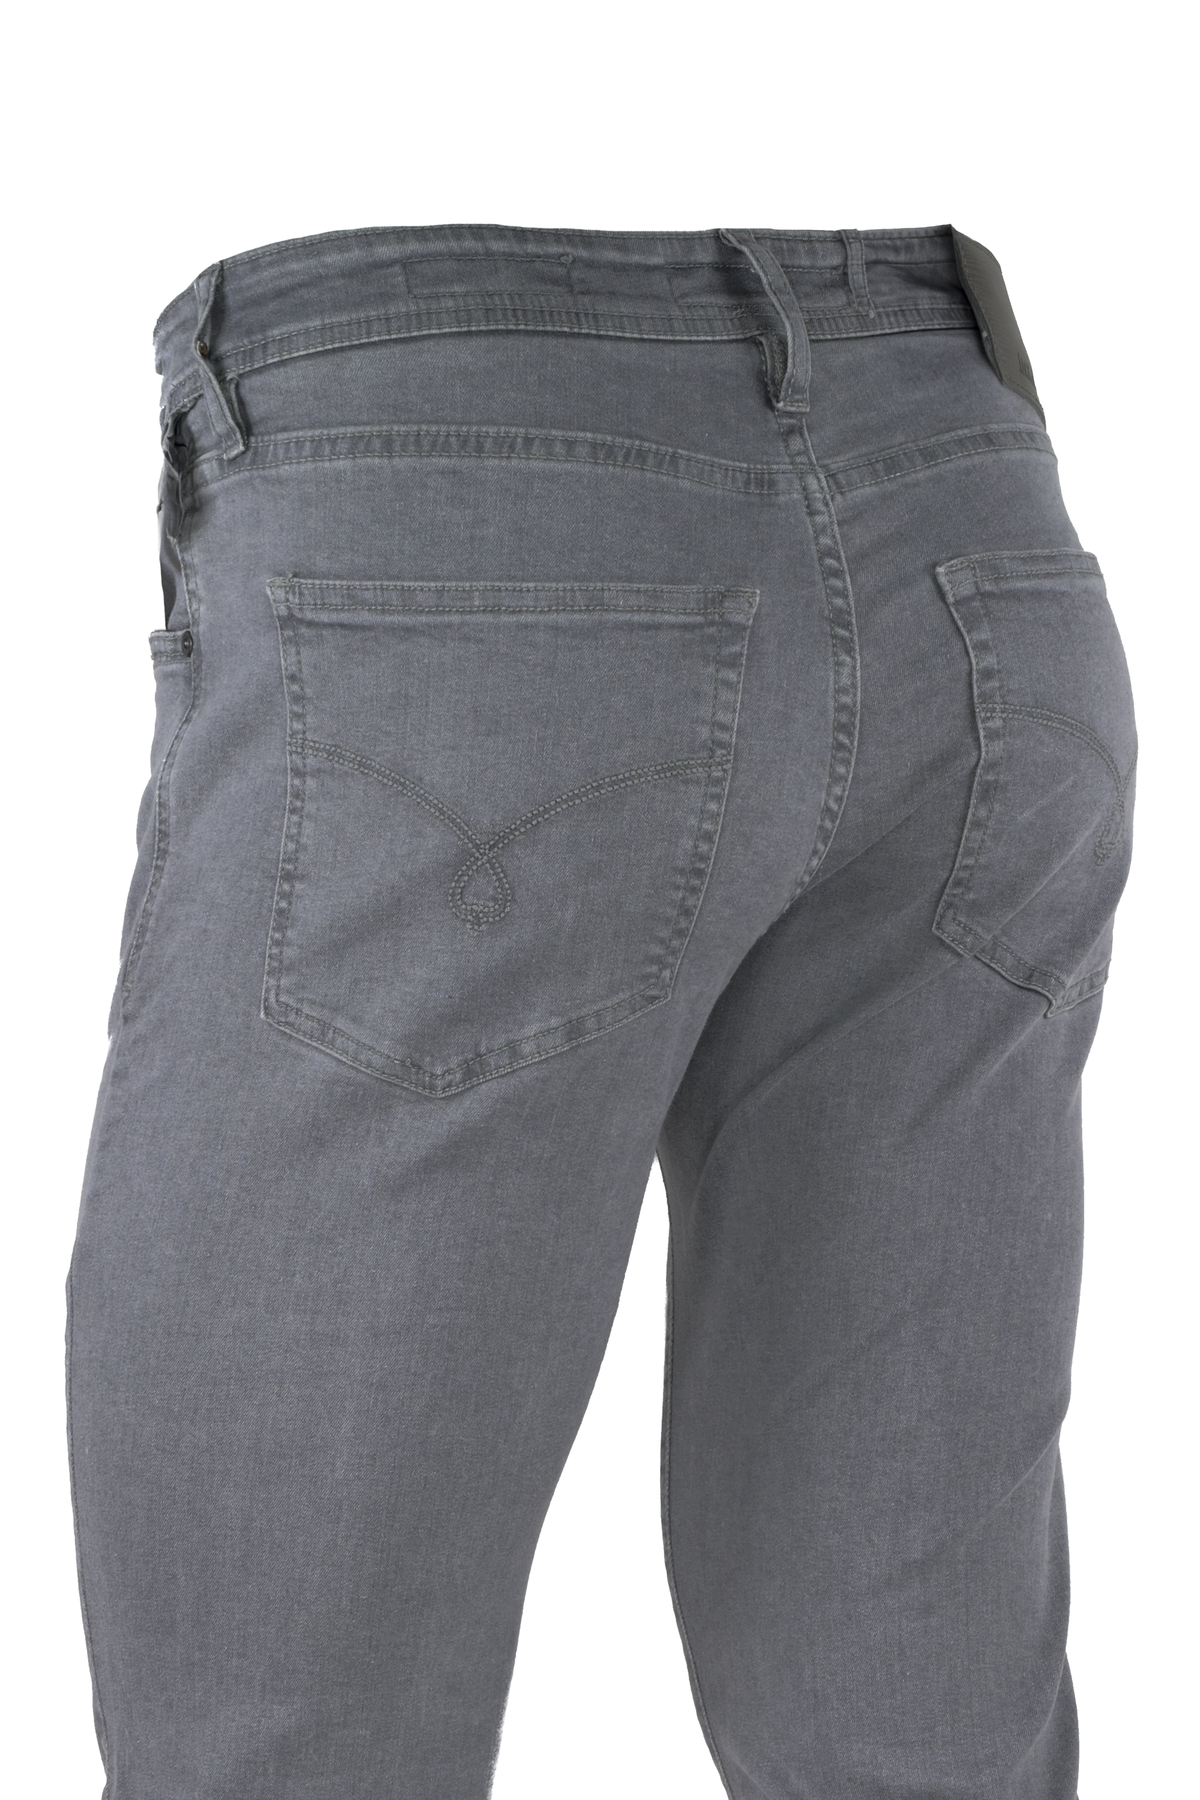 Jack of Spades Jeans Gray